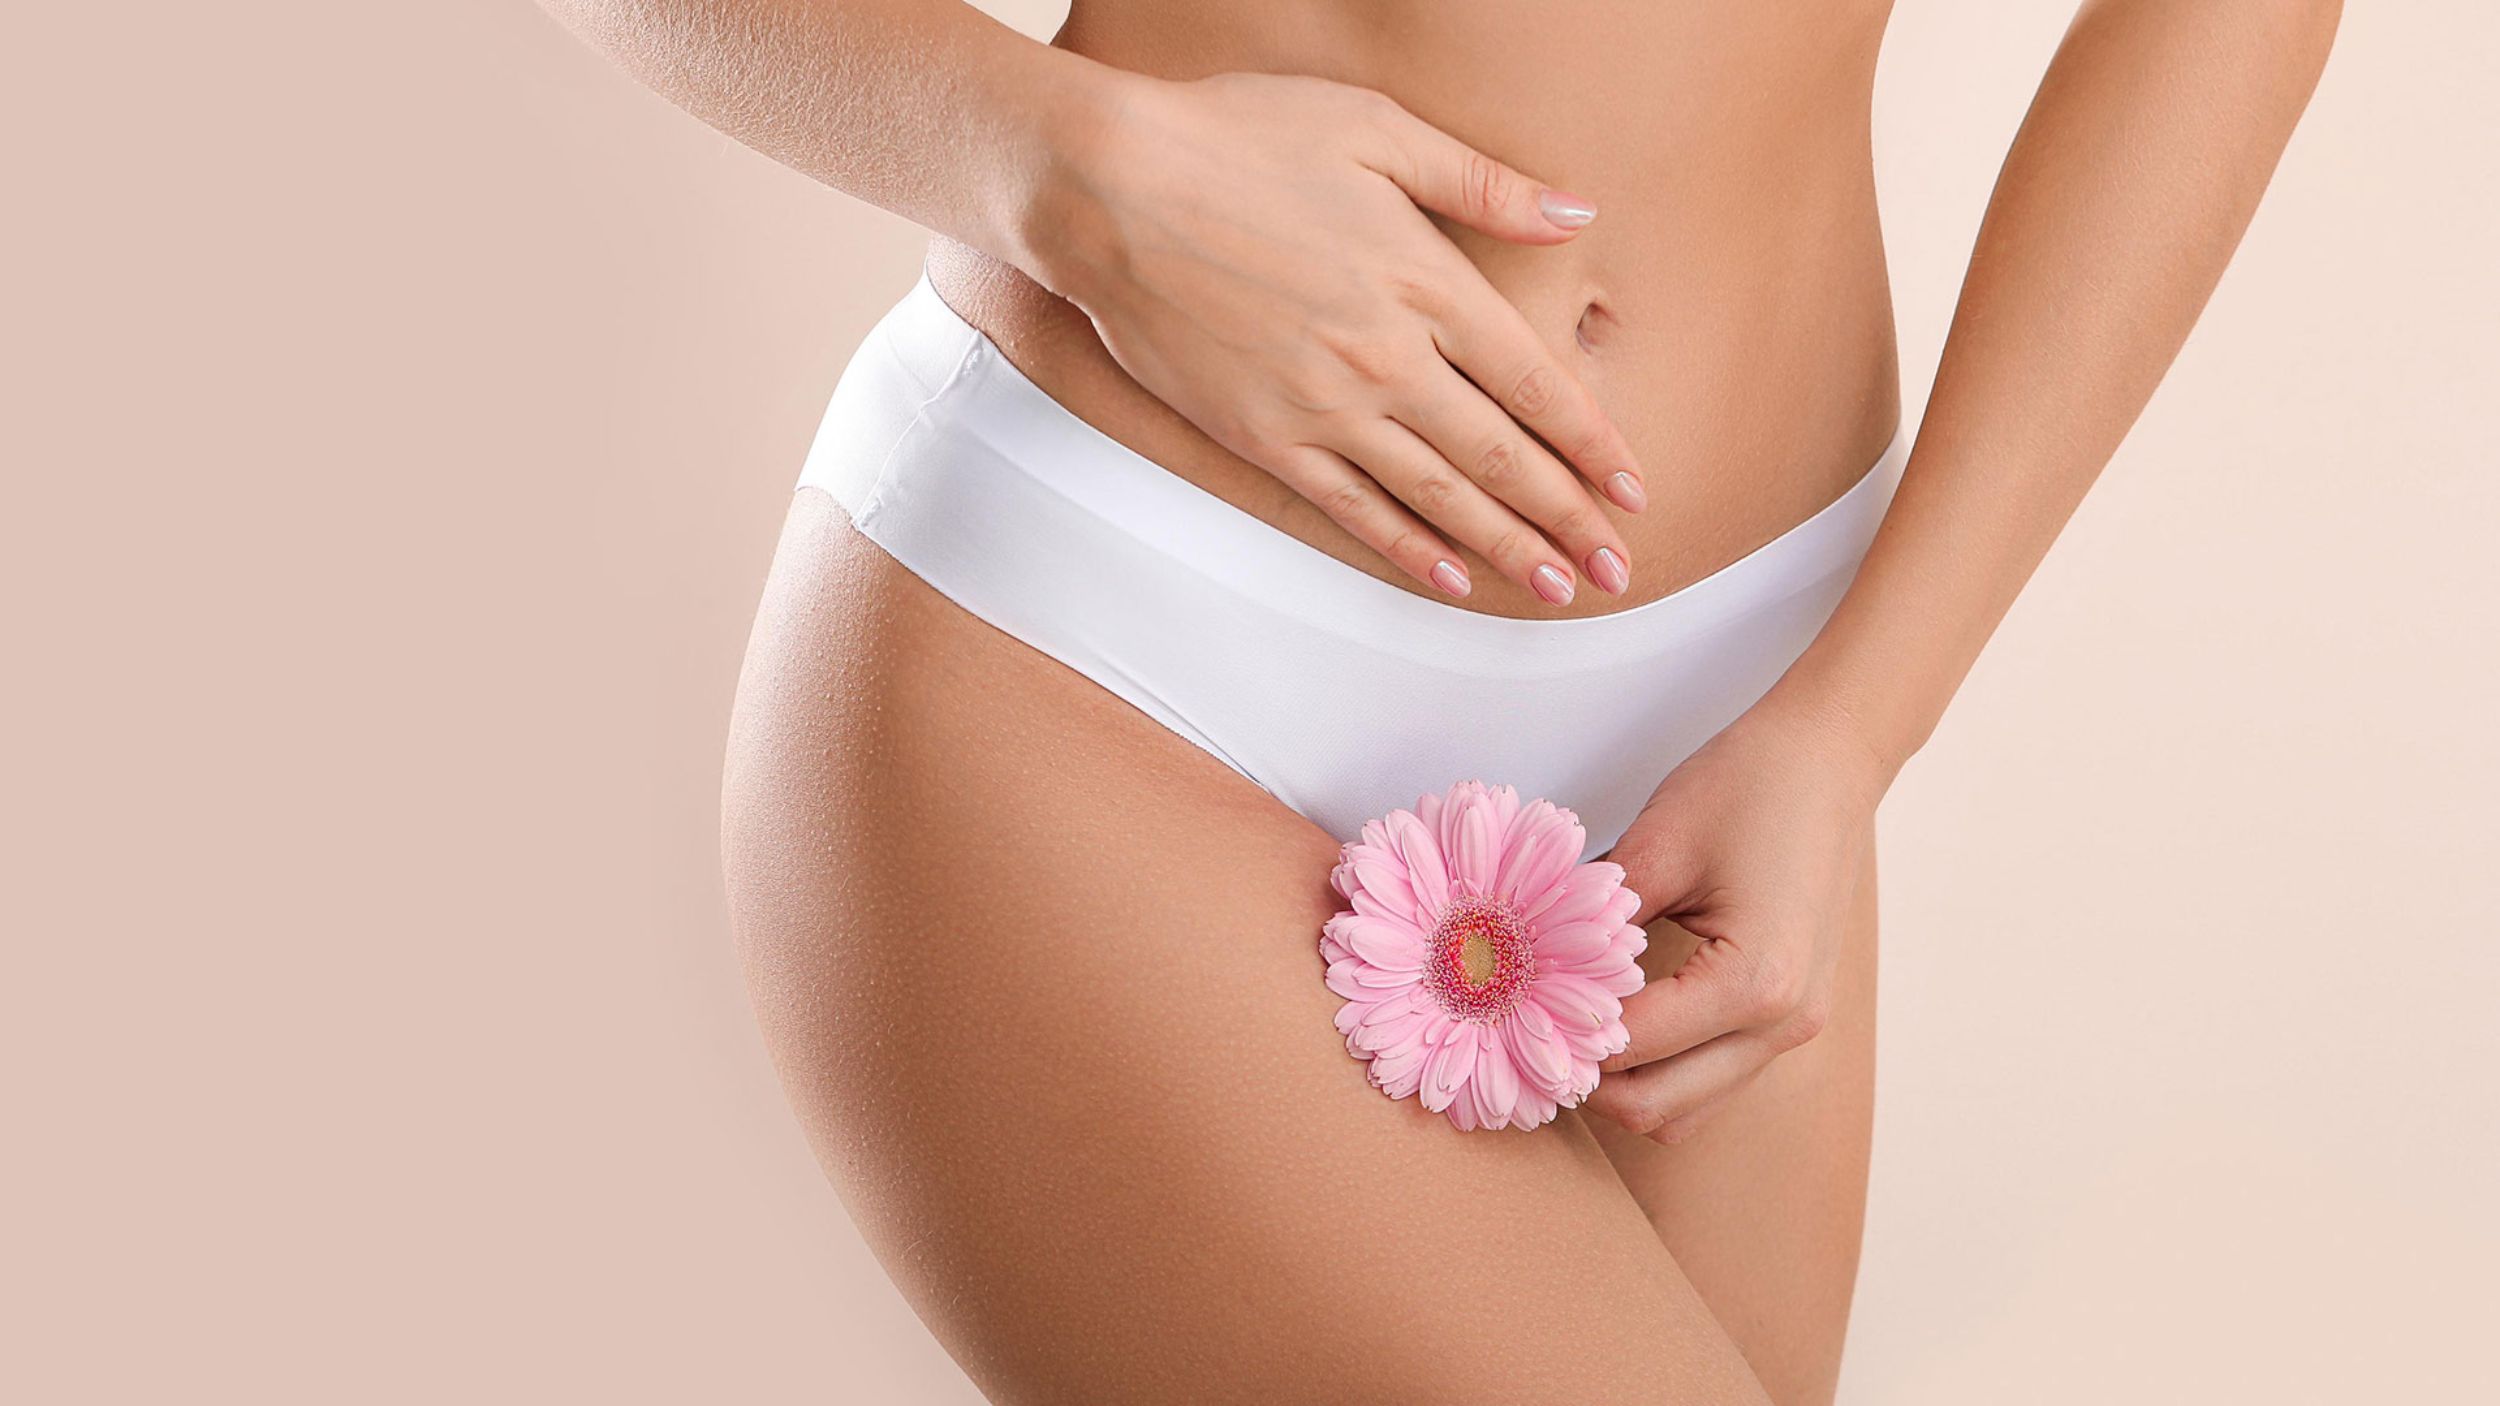 Female body with pink flower in intimate area